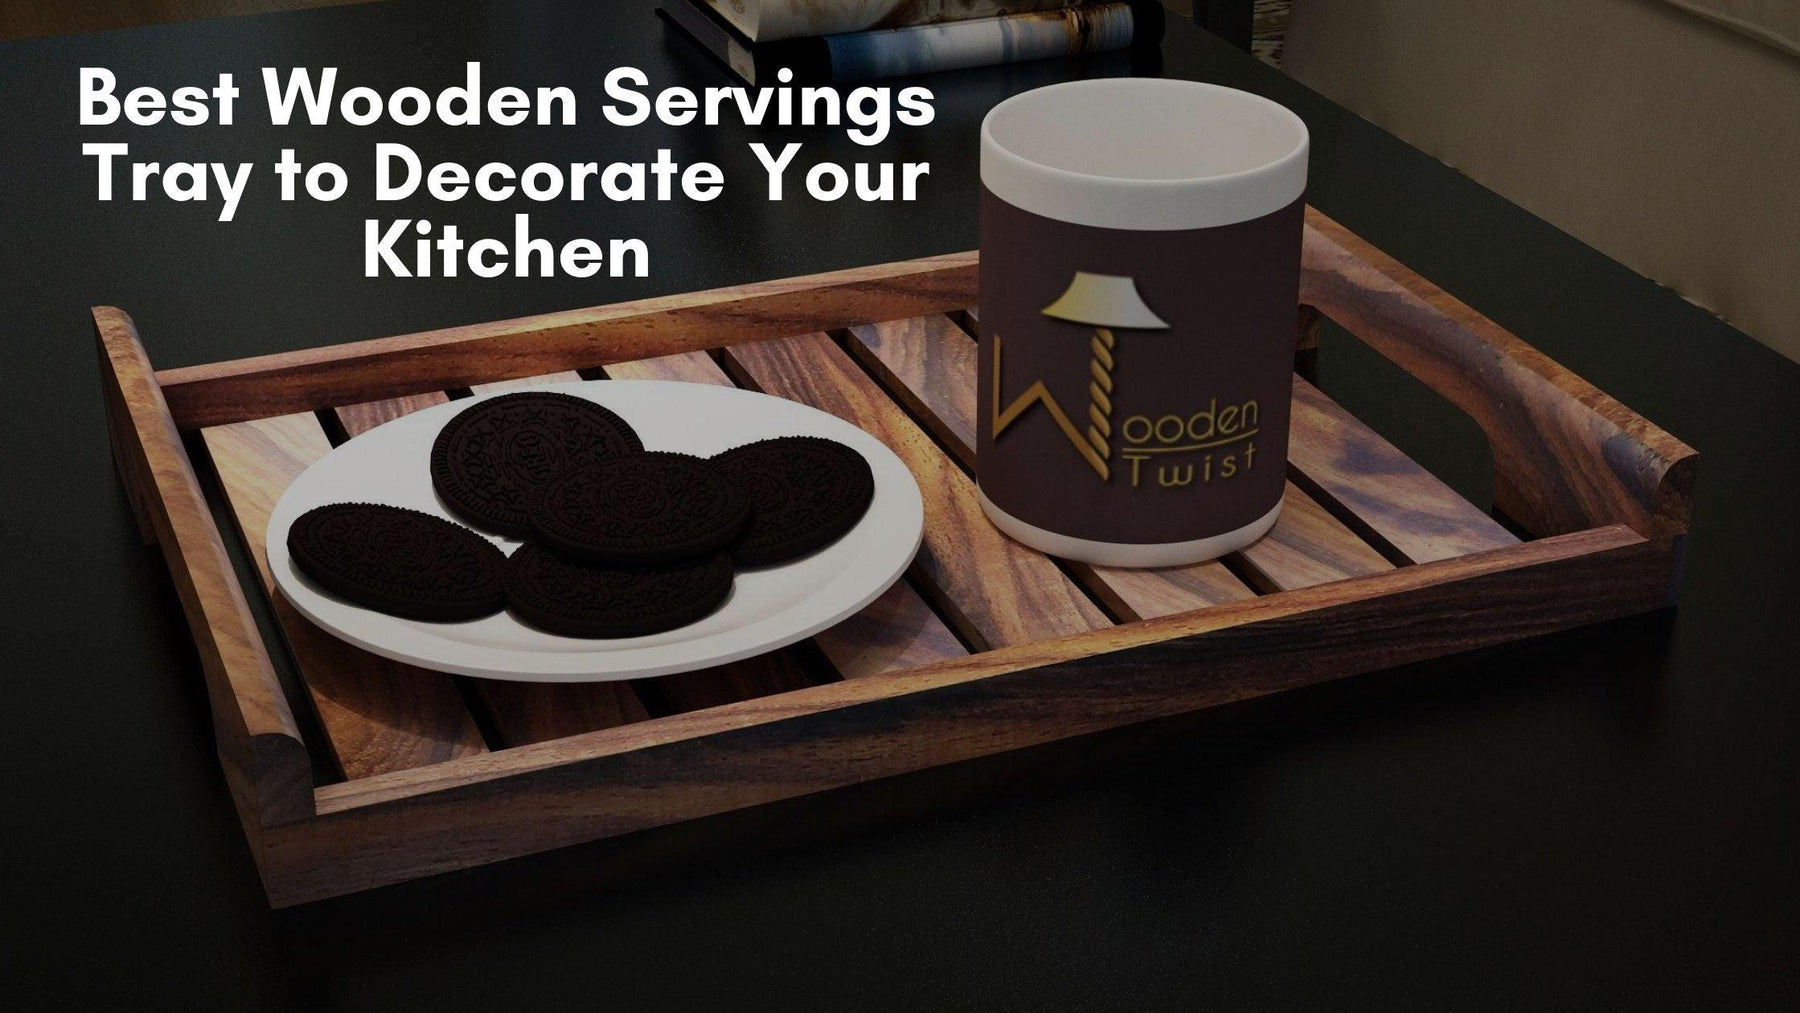 Best Wooden Servings Trays to Decorate Your Kitchen - WoodenTwist